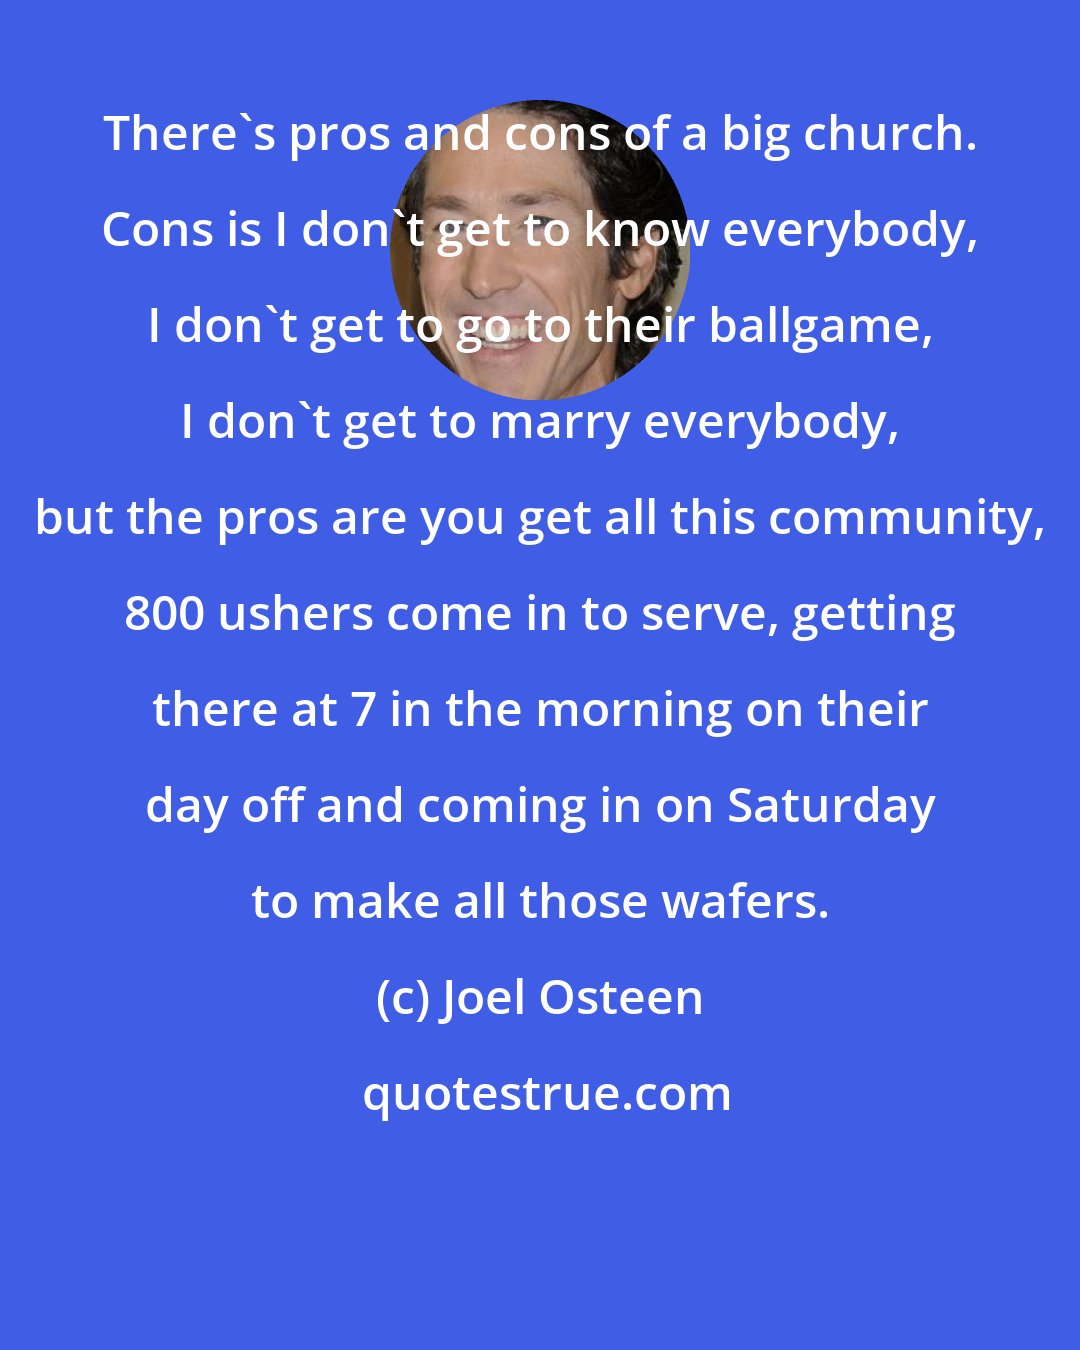 Joel Osteen: There's pros and cons of a big church. Cons is I don't get to know everybody, I don't get to go to their ballgame, I don't get to marry everybody, but the pros are you get all this community, 800 ushers come in to serve, getting there at 7 in the morning on their day off and coming in on Saturday to make all those wafers.